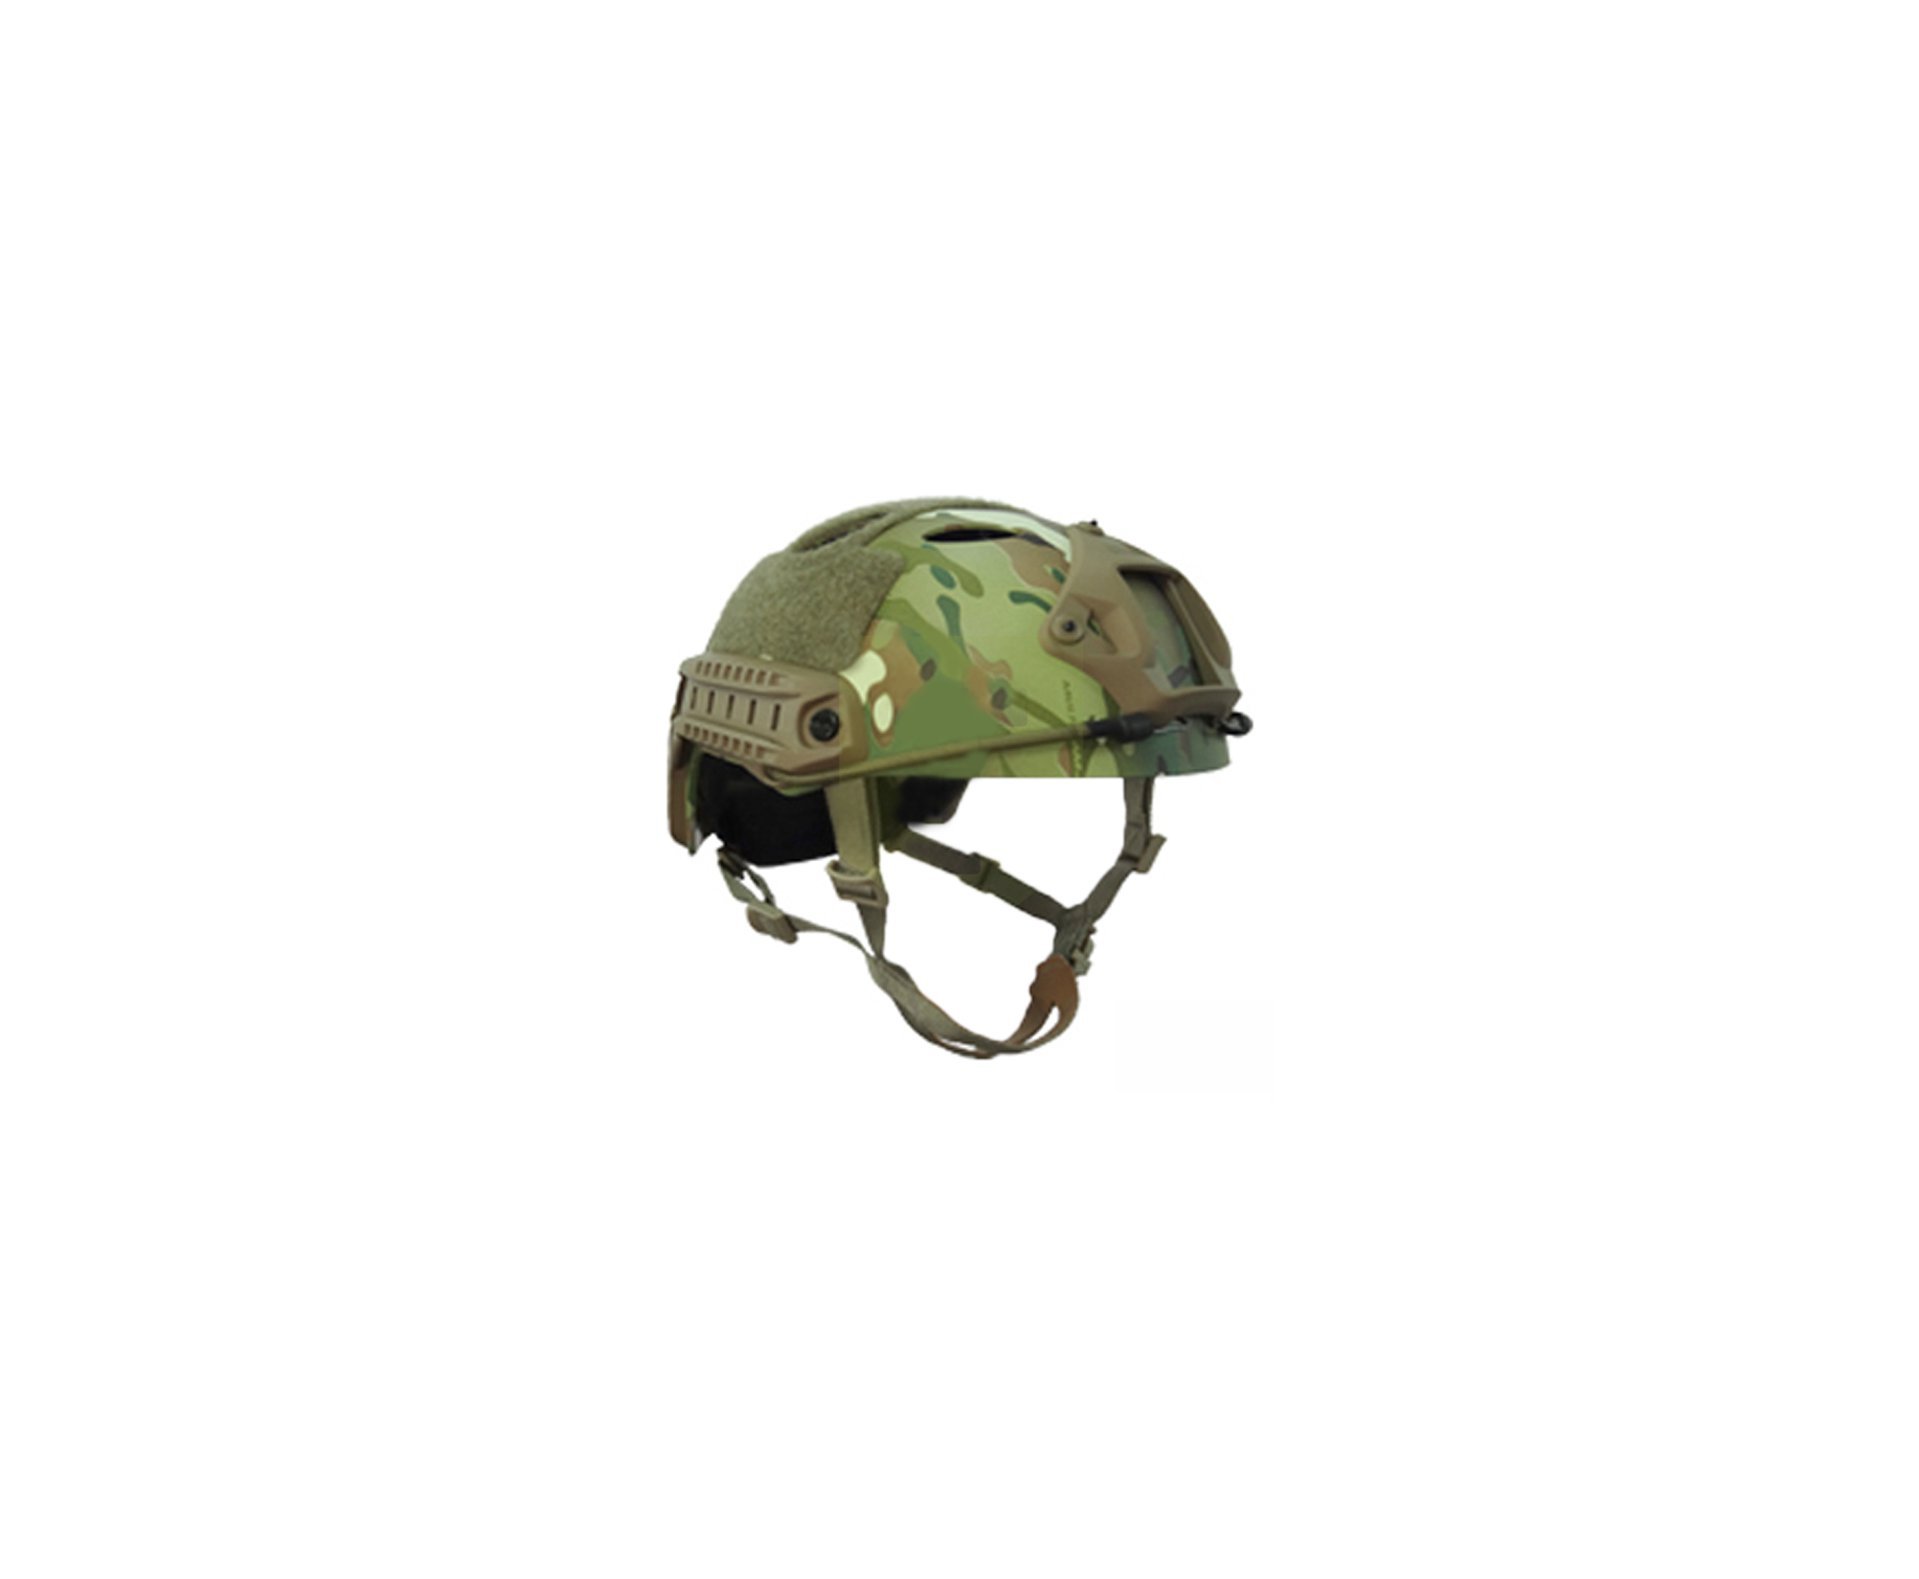 Capacete Tático Para Airsoft/paintball Mod Fast-p1 Multican